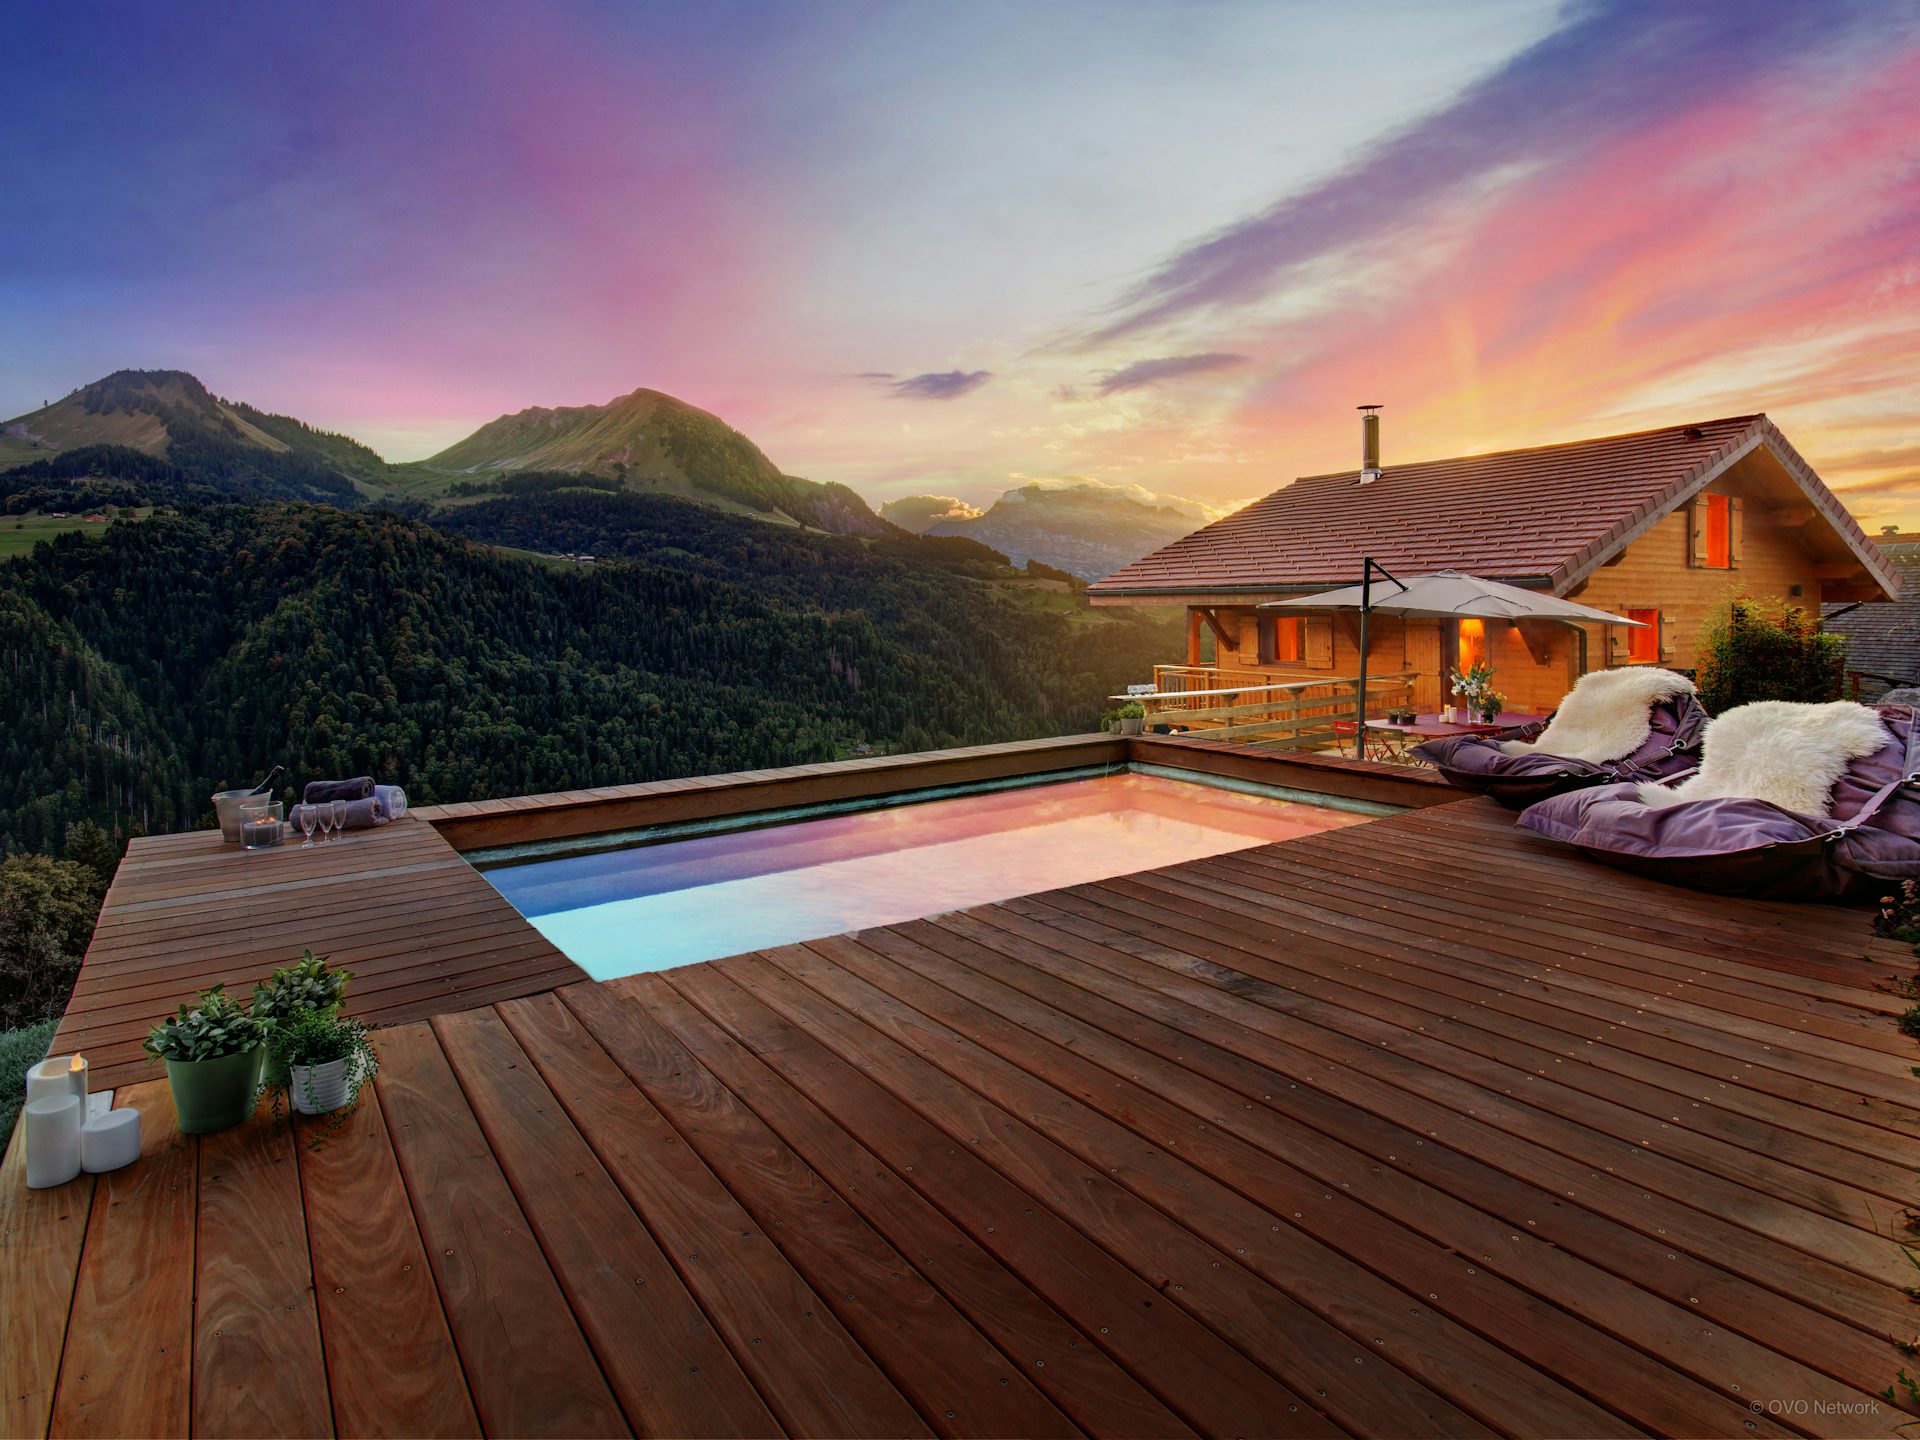 Swimming pool with mountain view at sunset